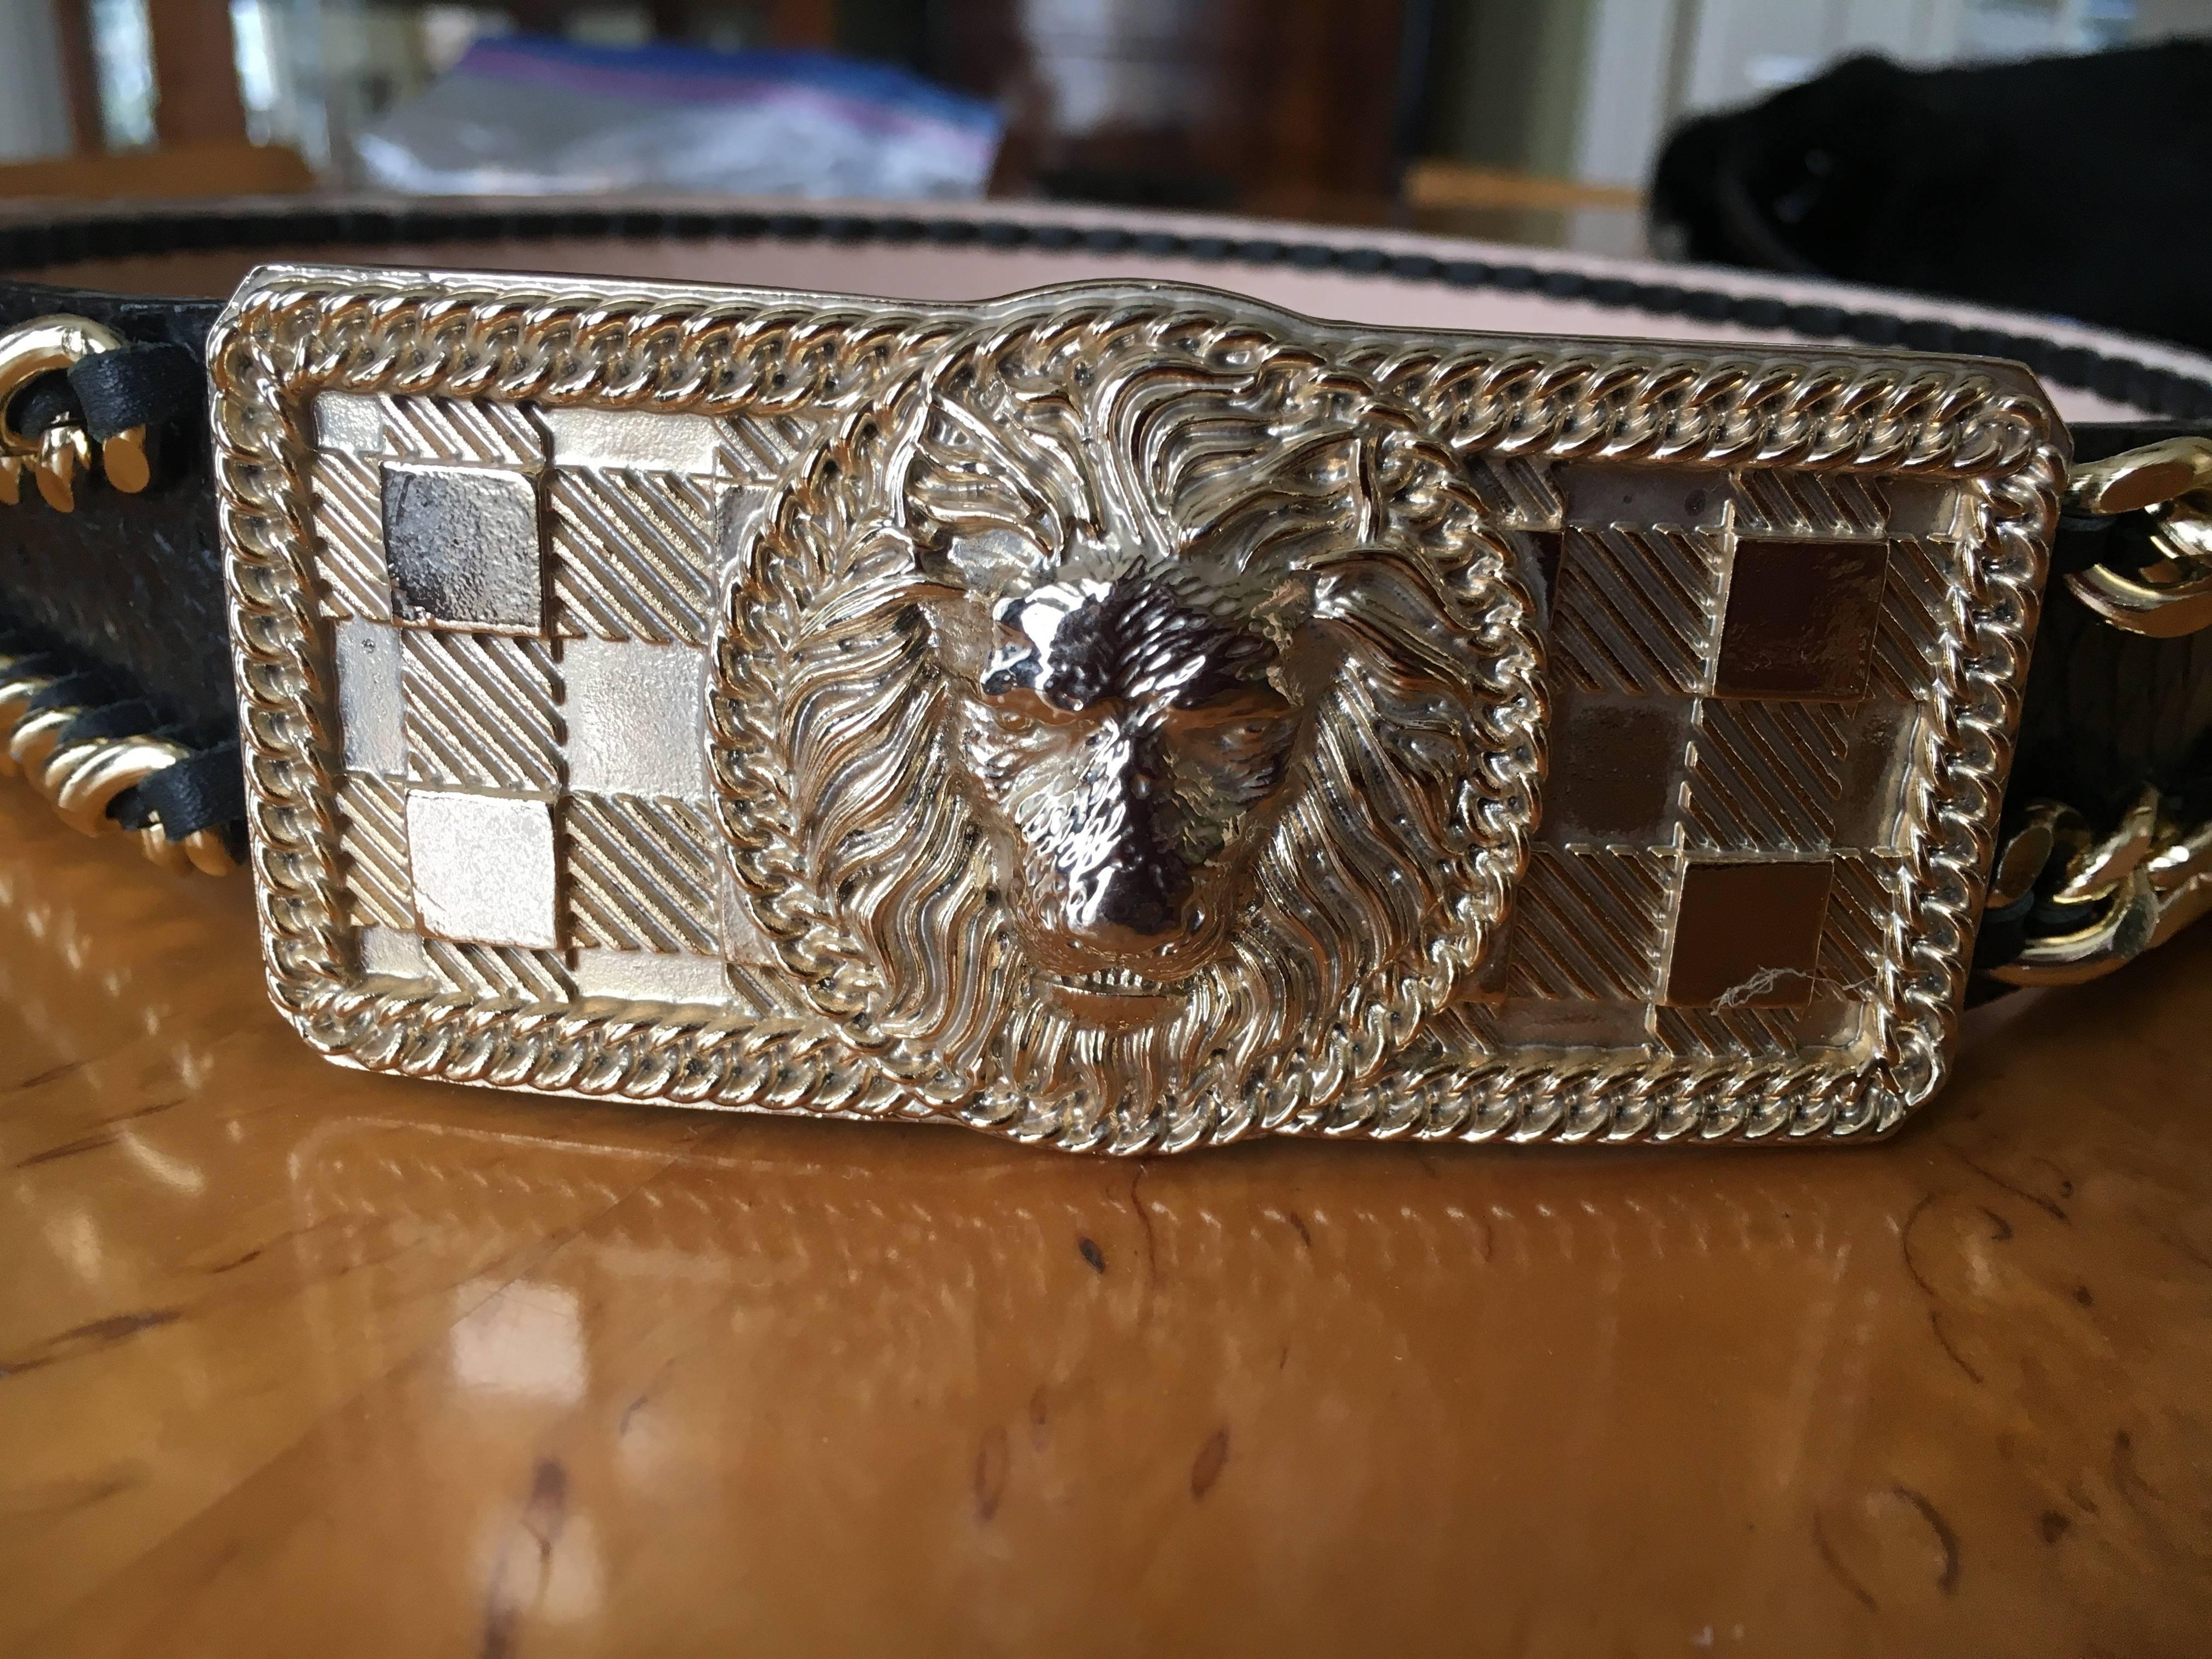 Balmain Chain Accented Belt with Lion Head Buckle.
1.75